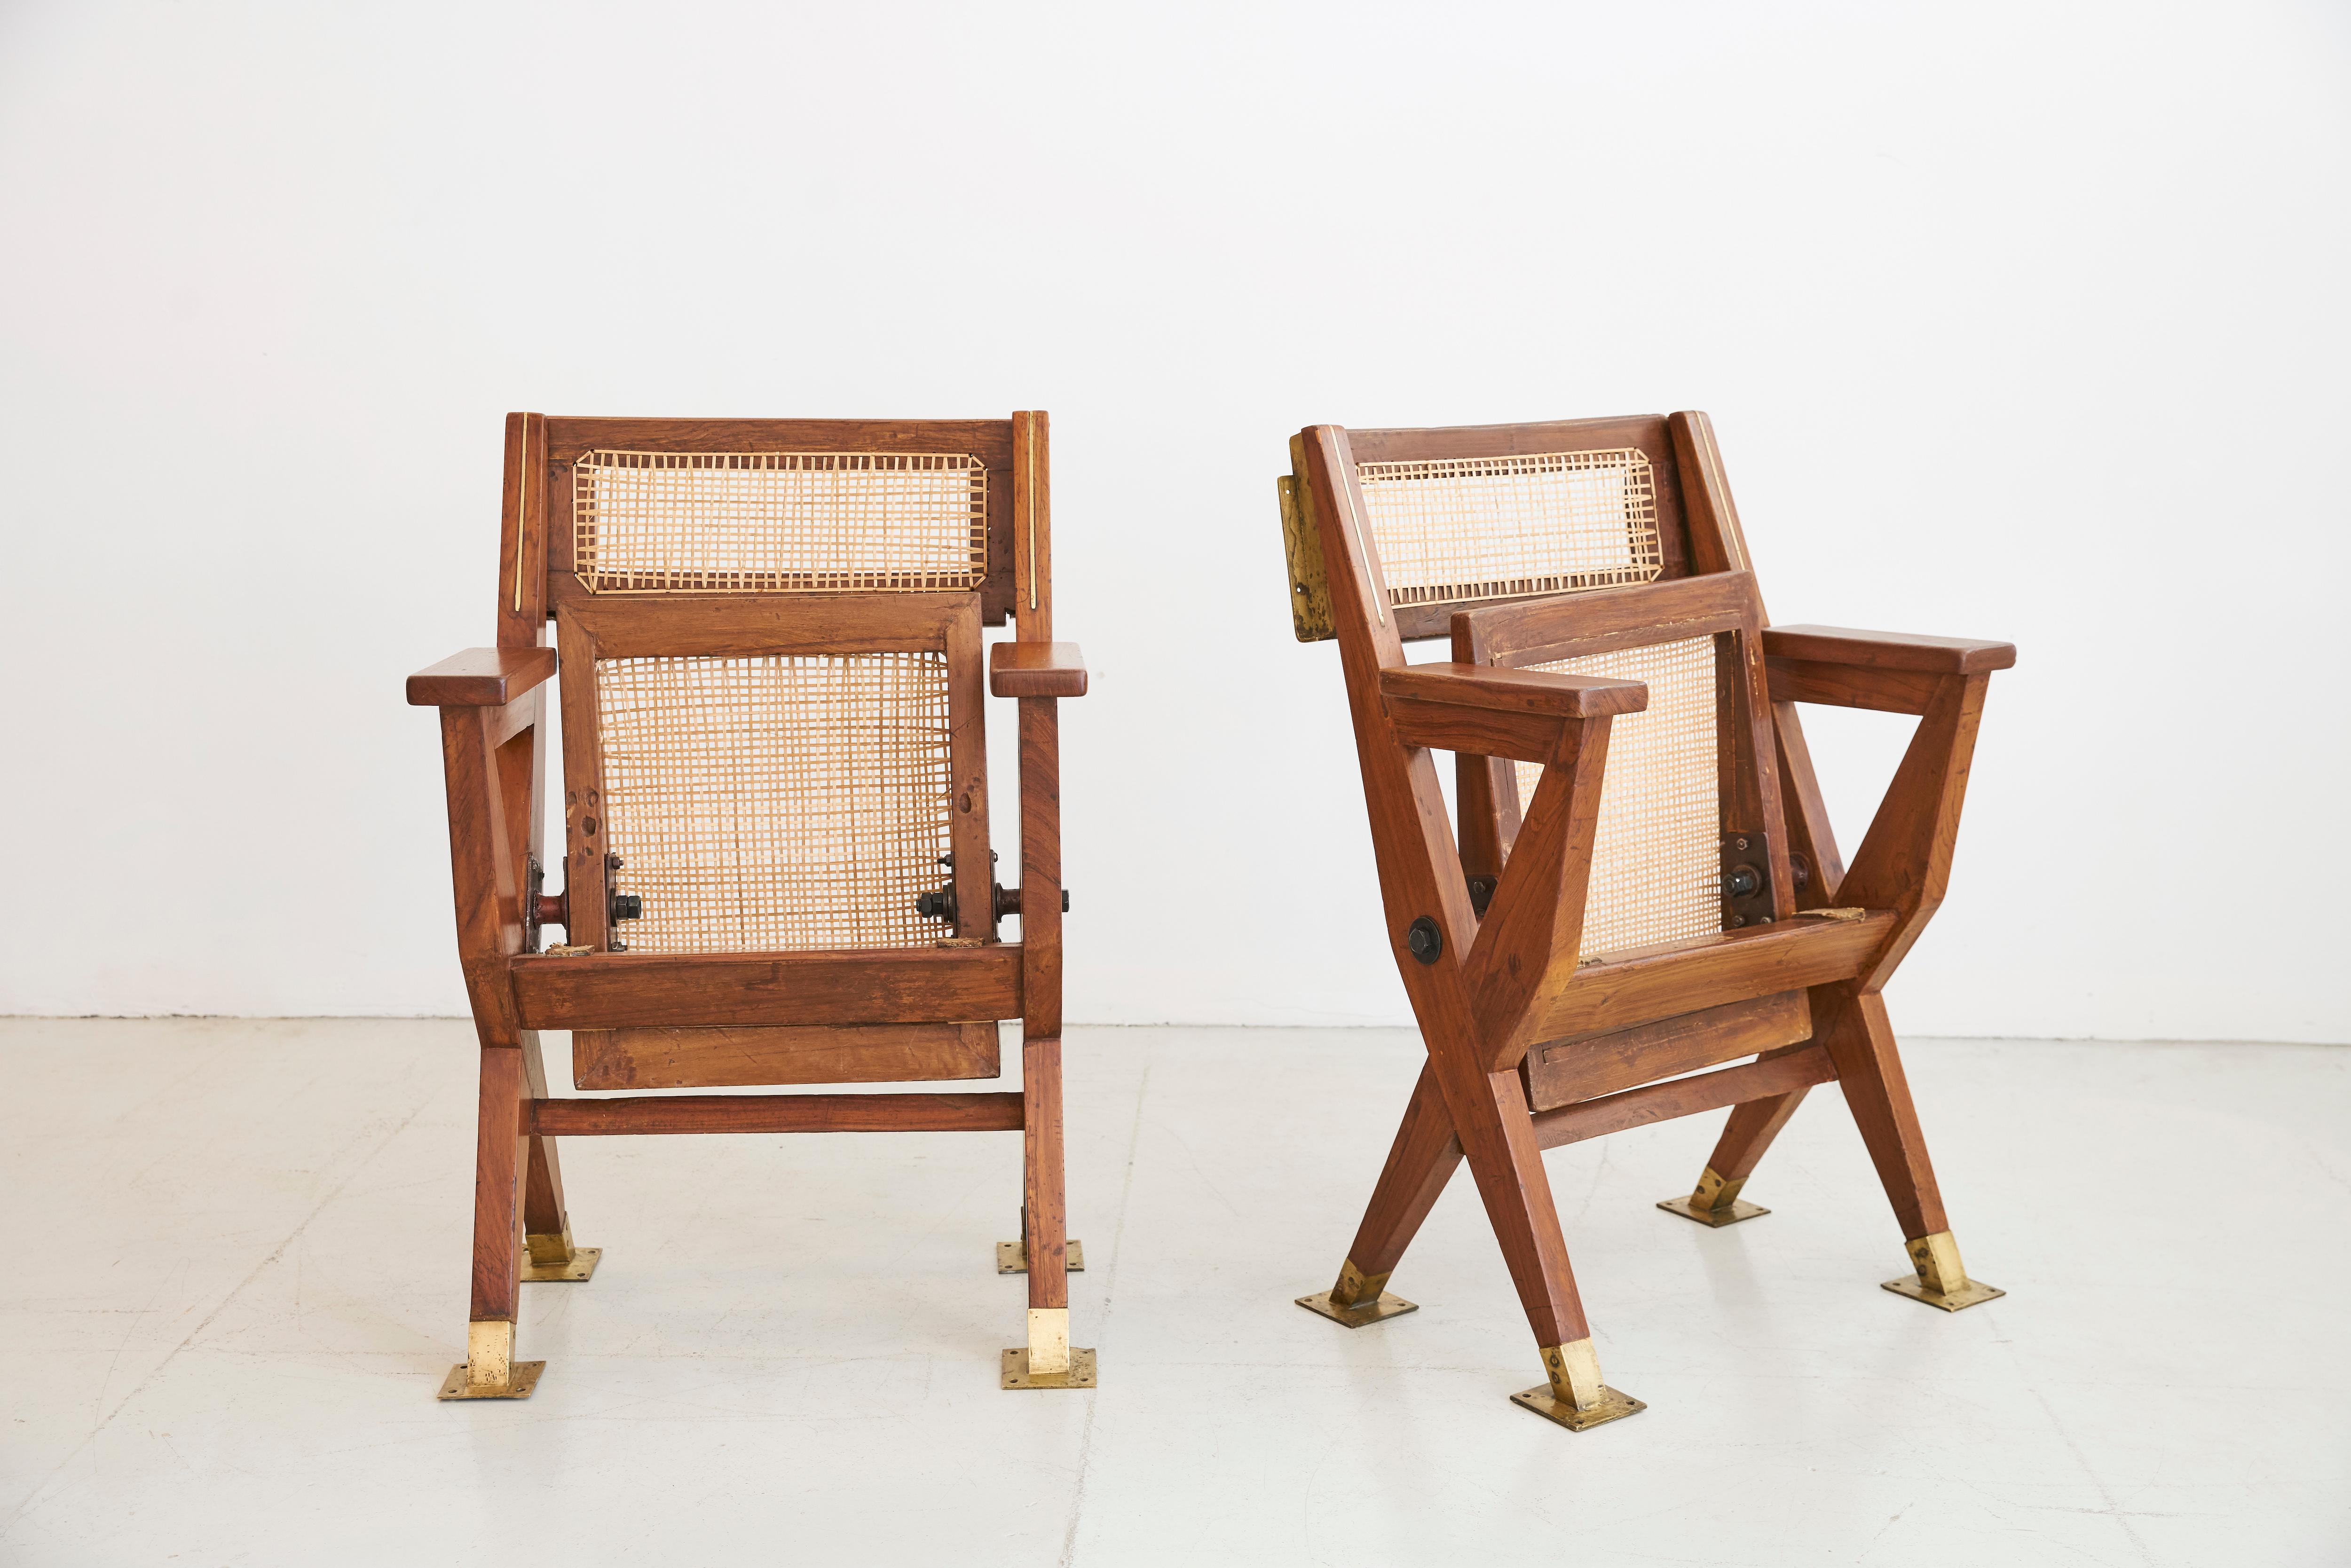 Pair of original folding Cinema chairs from Chandigarh, circa 1960
Teak wood, heavy solid brass fittings and new caning. 

